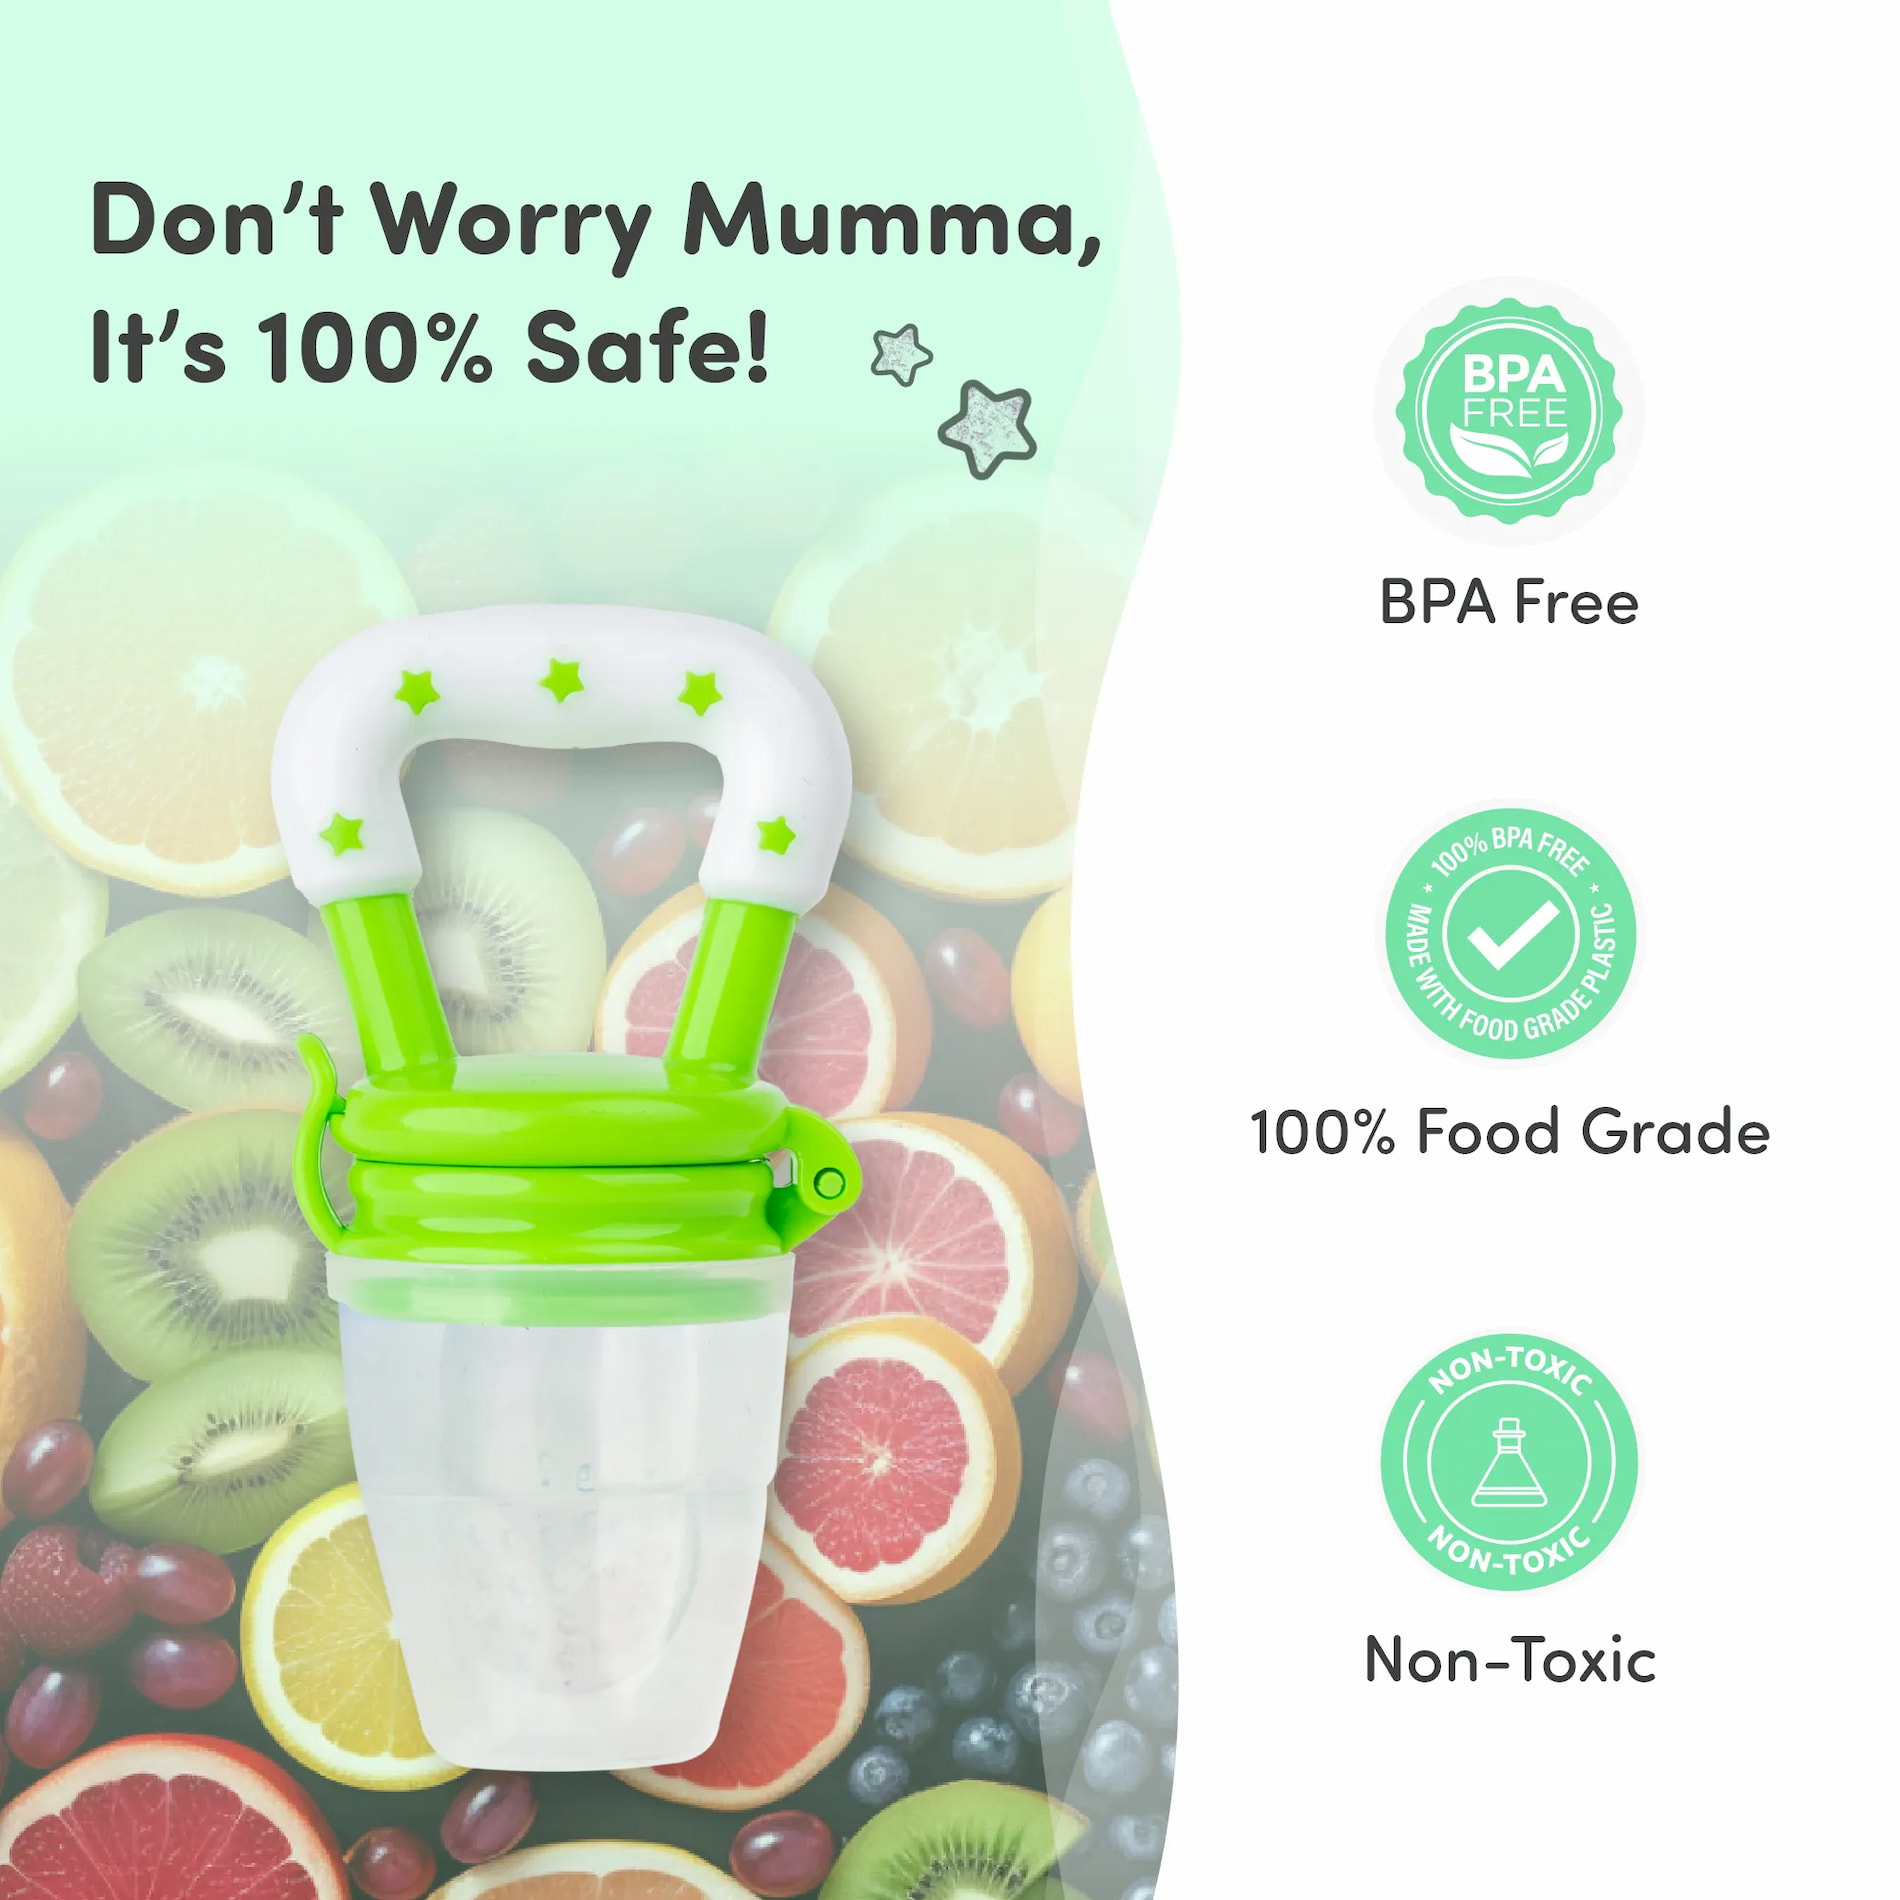 Feels Natural Ultra Soft Fruit & Food Nibbler- Green | Convenient to Introduce Fruits & Veggies to Baby | Ultra-soft Silicone Mesh for Easy Chewing | Easy One Snap Filling | Helps Relieve Teething Discomfort